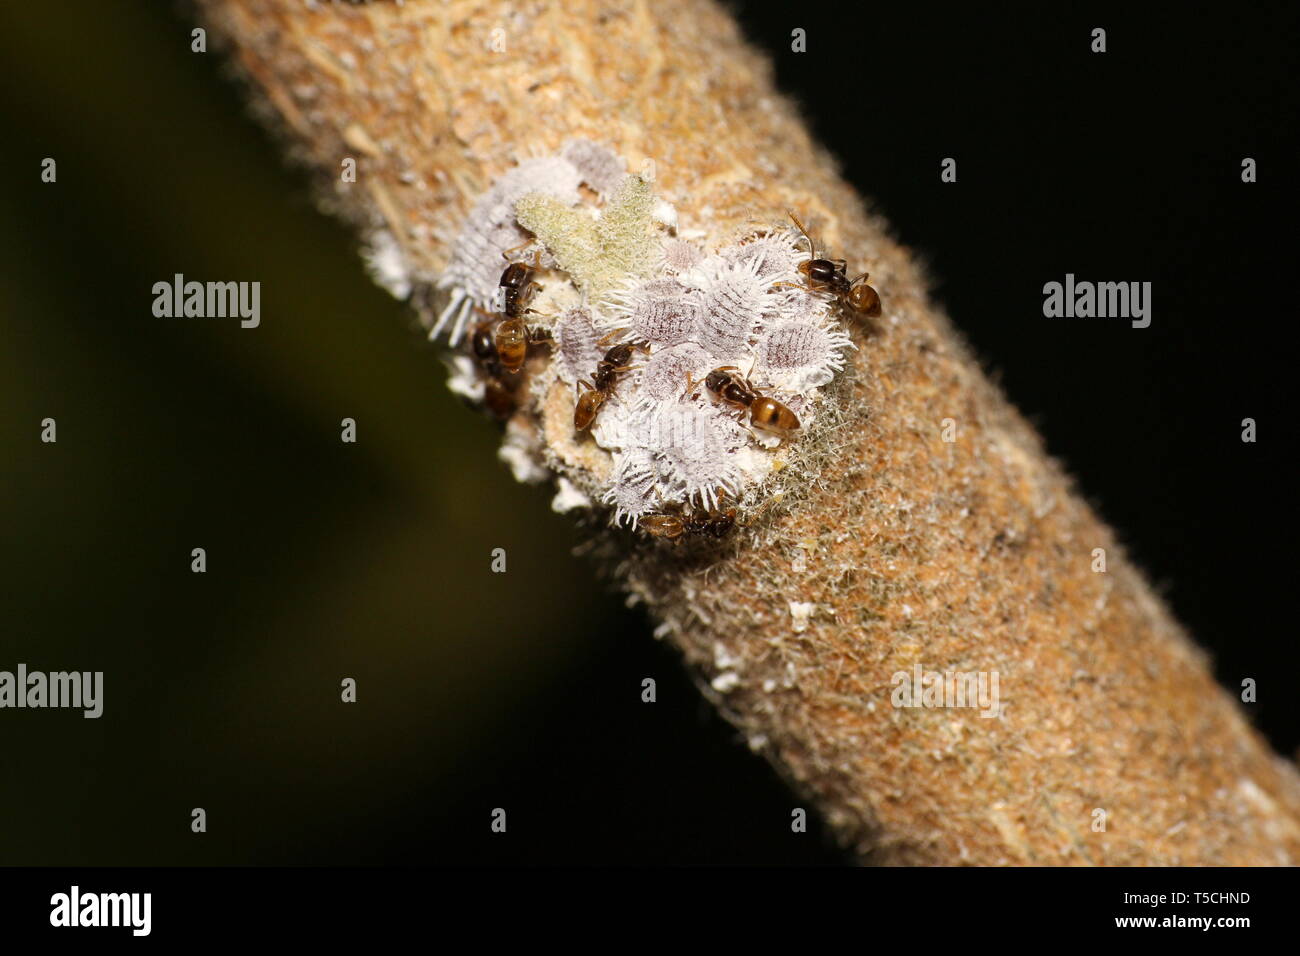 Mealybugs of pseudococcidae family which are garden pests, and predatory ants on an eggplant branch Stock Photo